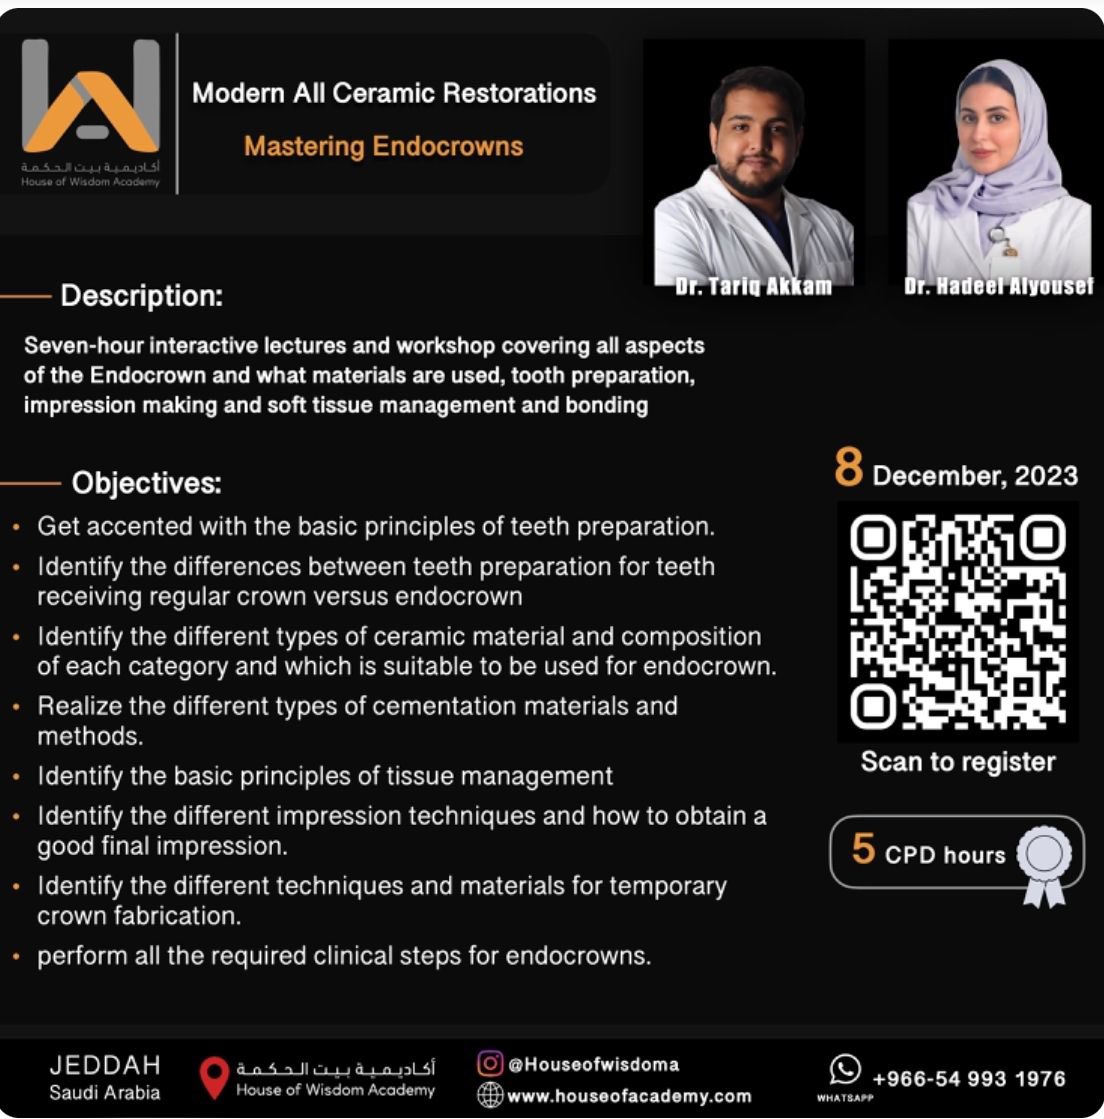 Registration is open for the upcoming workshop (Mastering Endocrown) Presented by Dr.Hadeel Alyousef and Dr.Tariq Akkam Accredited by Schsorg For registration : houseofacademy.com/courses/41